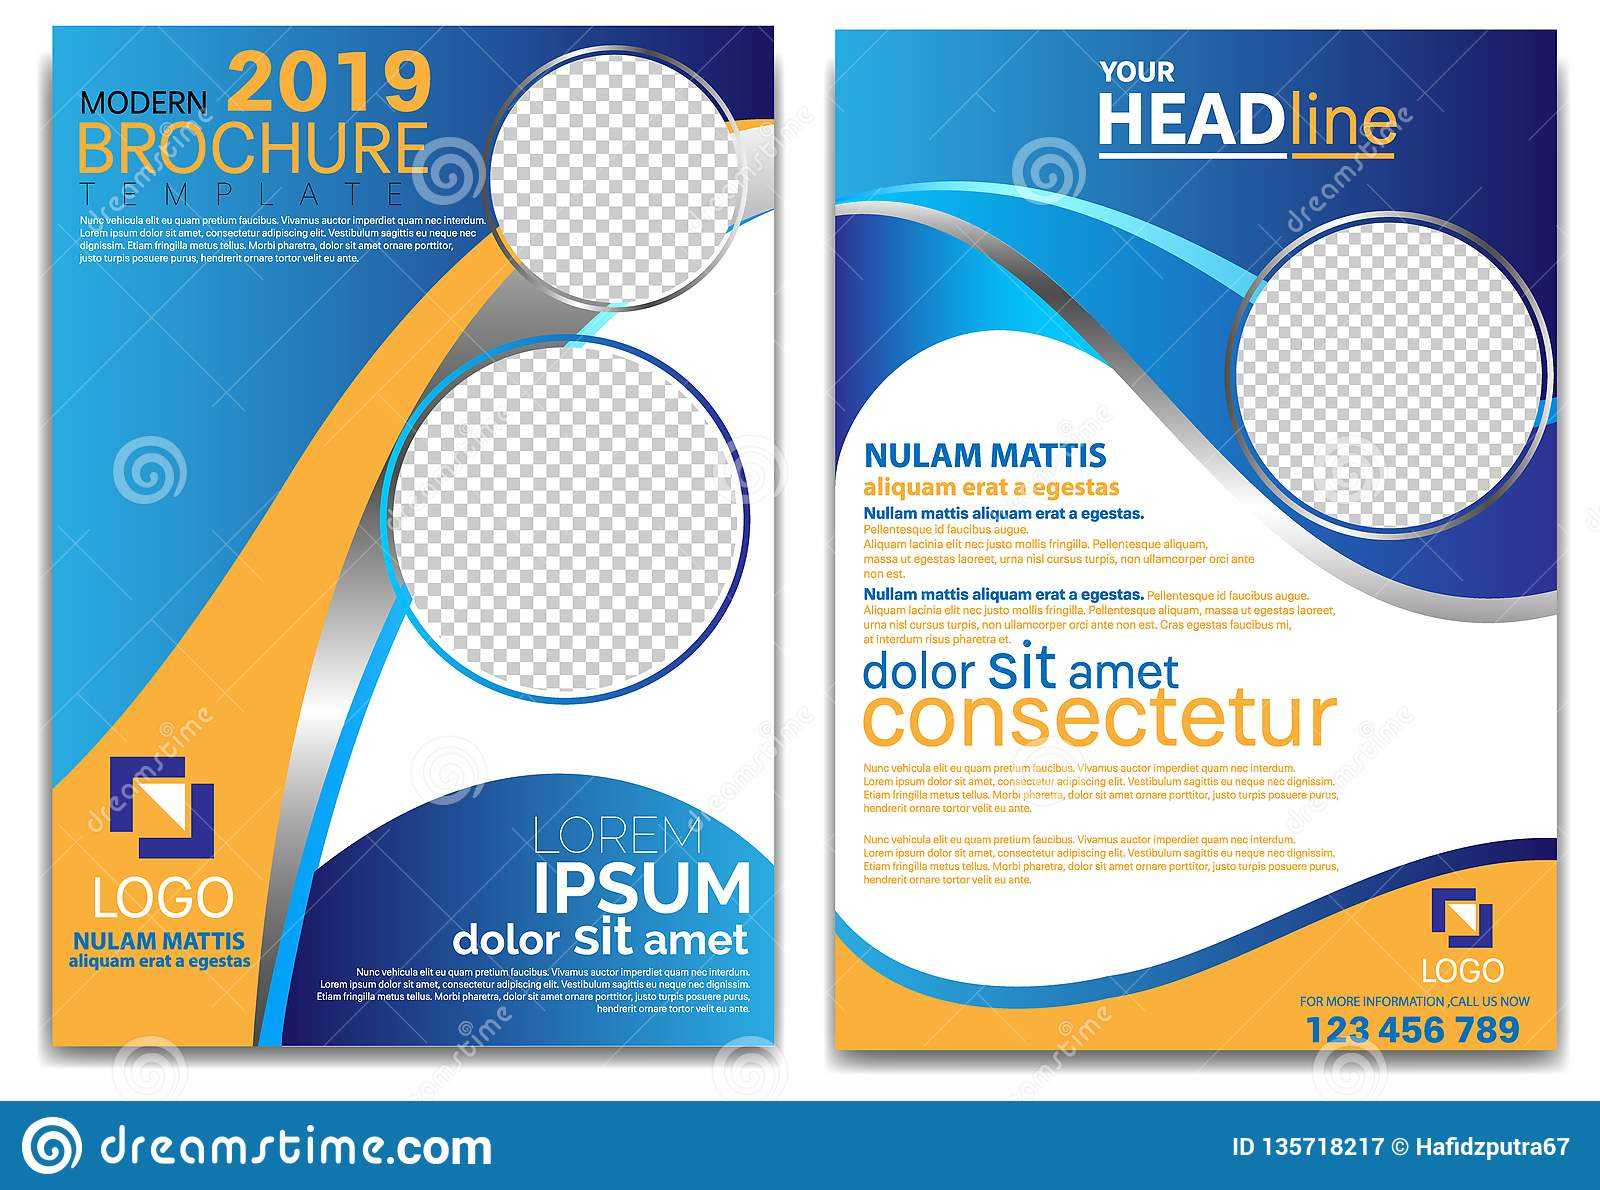 Modern Brochure Template 2019 And Professional Brochure For School Brochure Design Templates